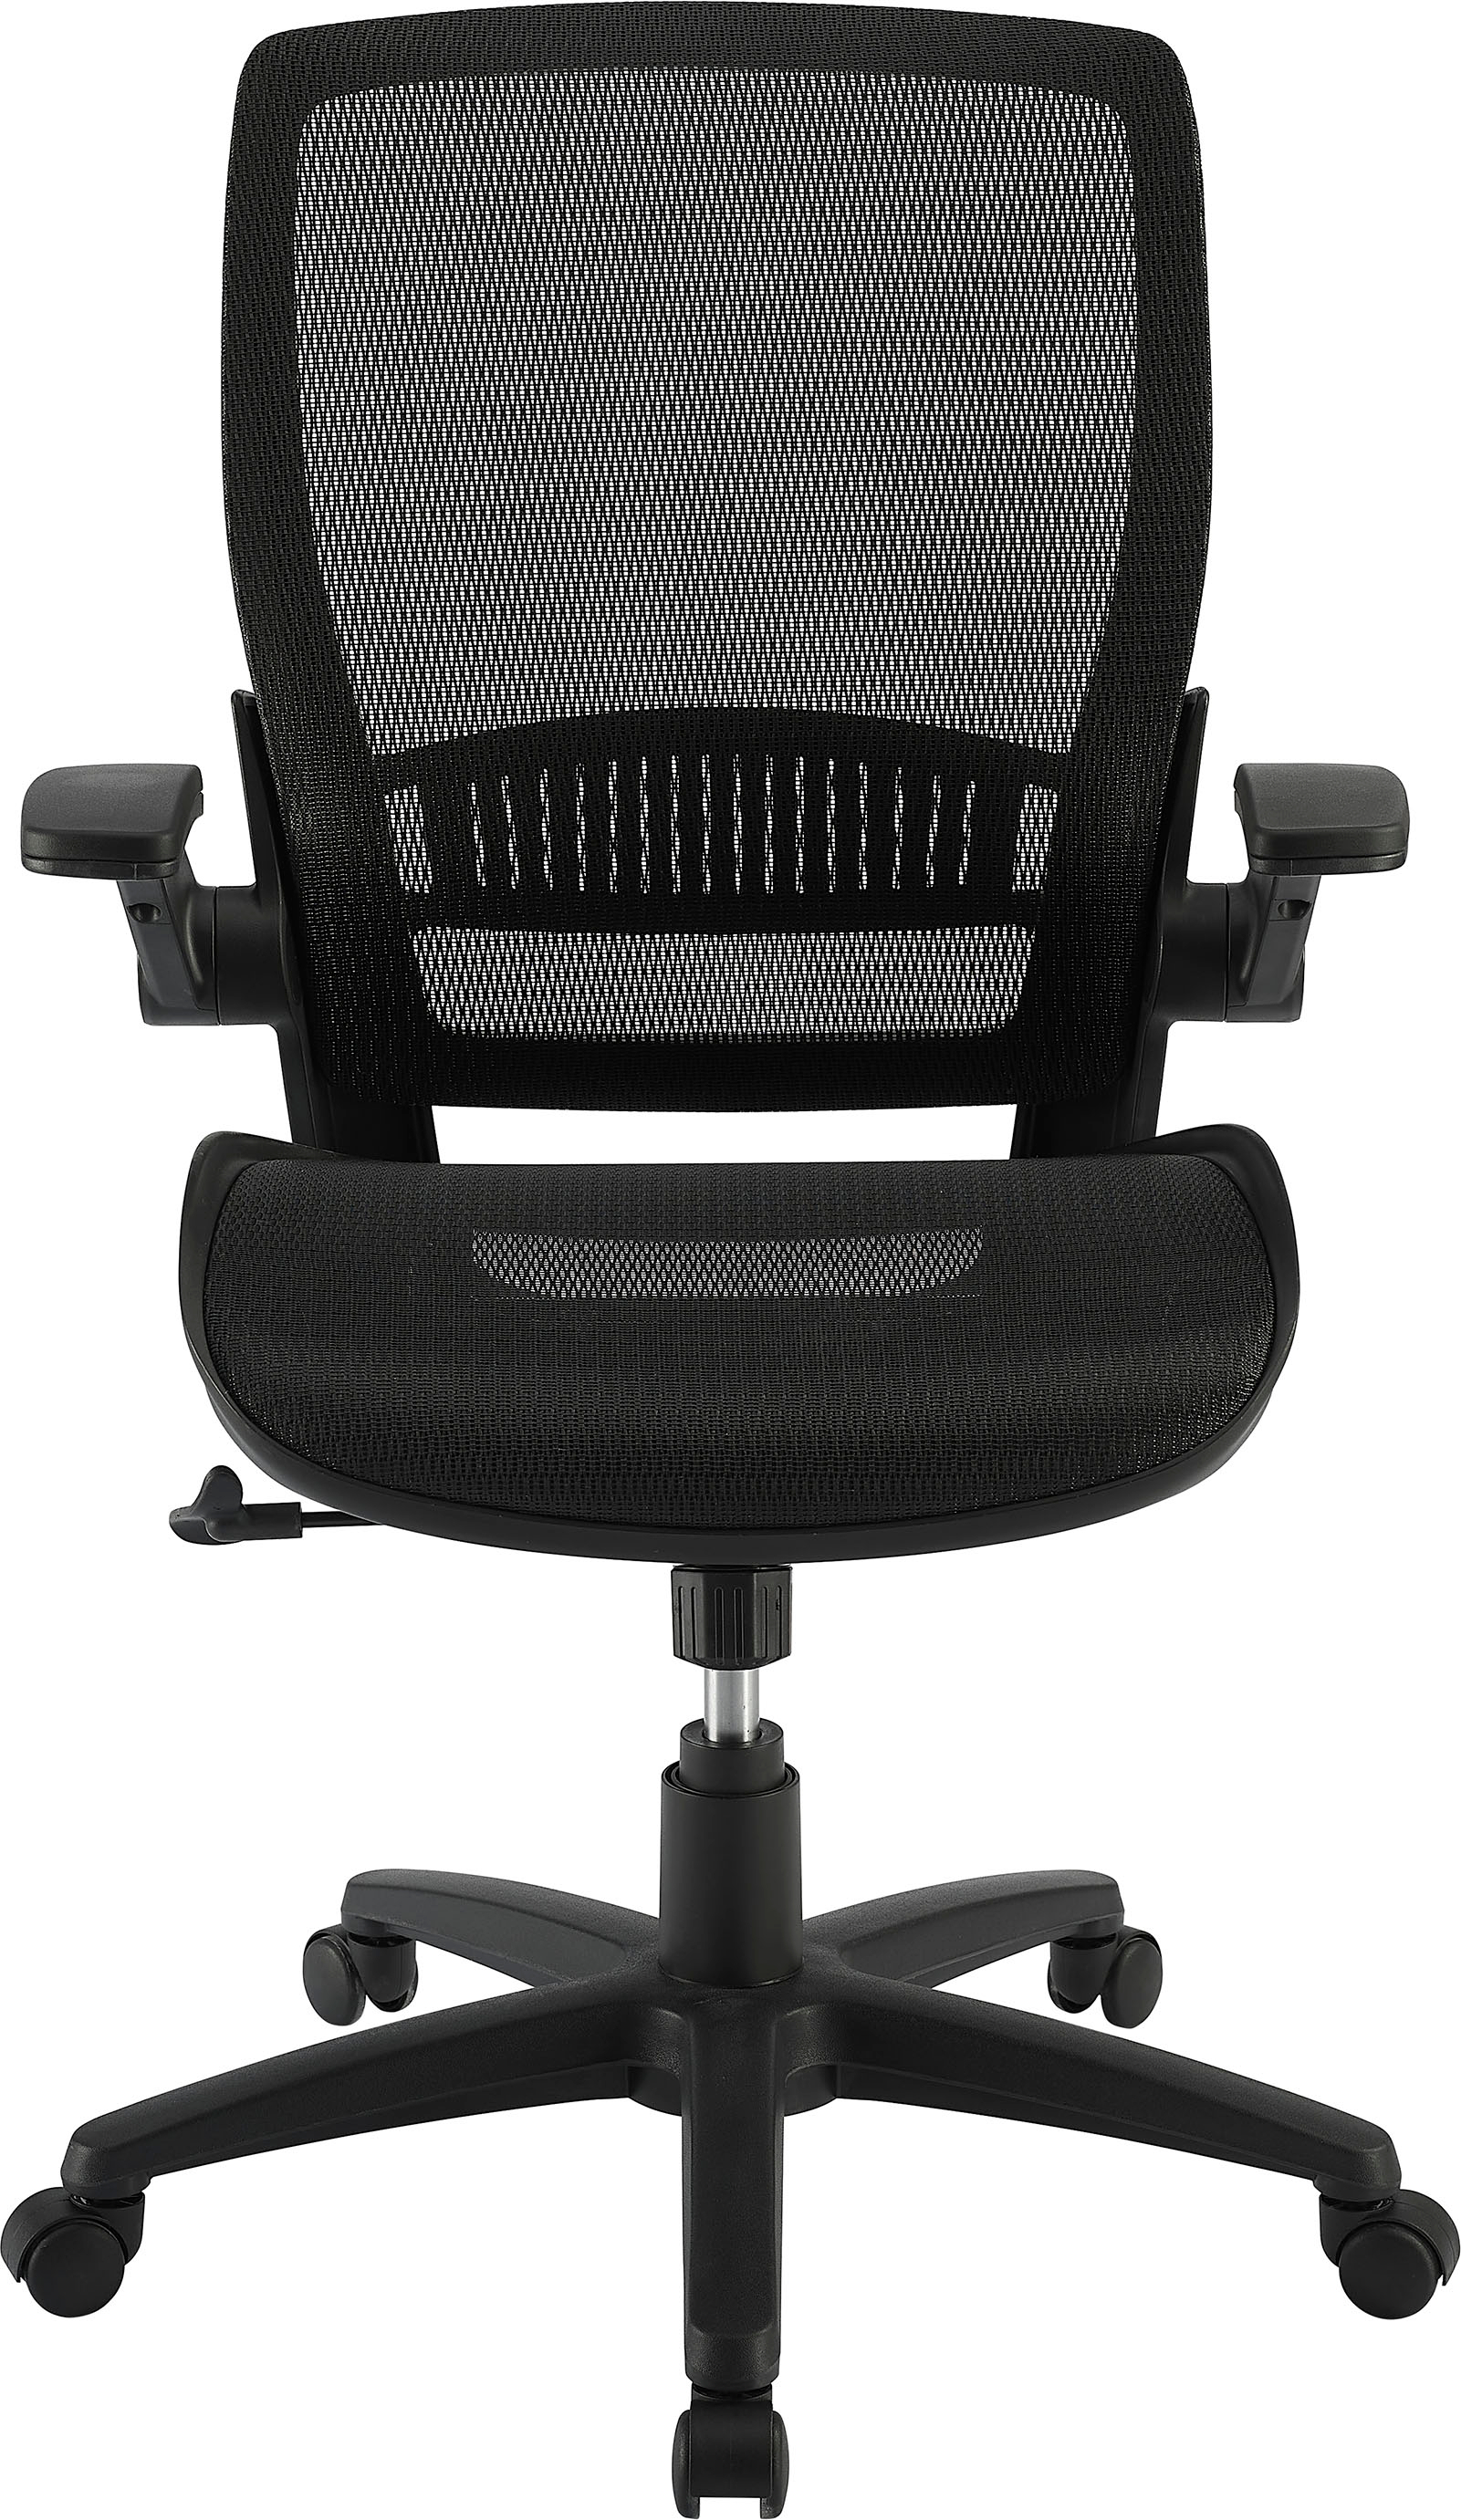 Insignia - Ergonomic Mesh Office Chair with Adjustable Arms - Black